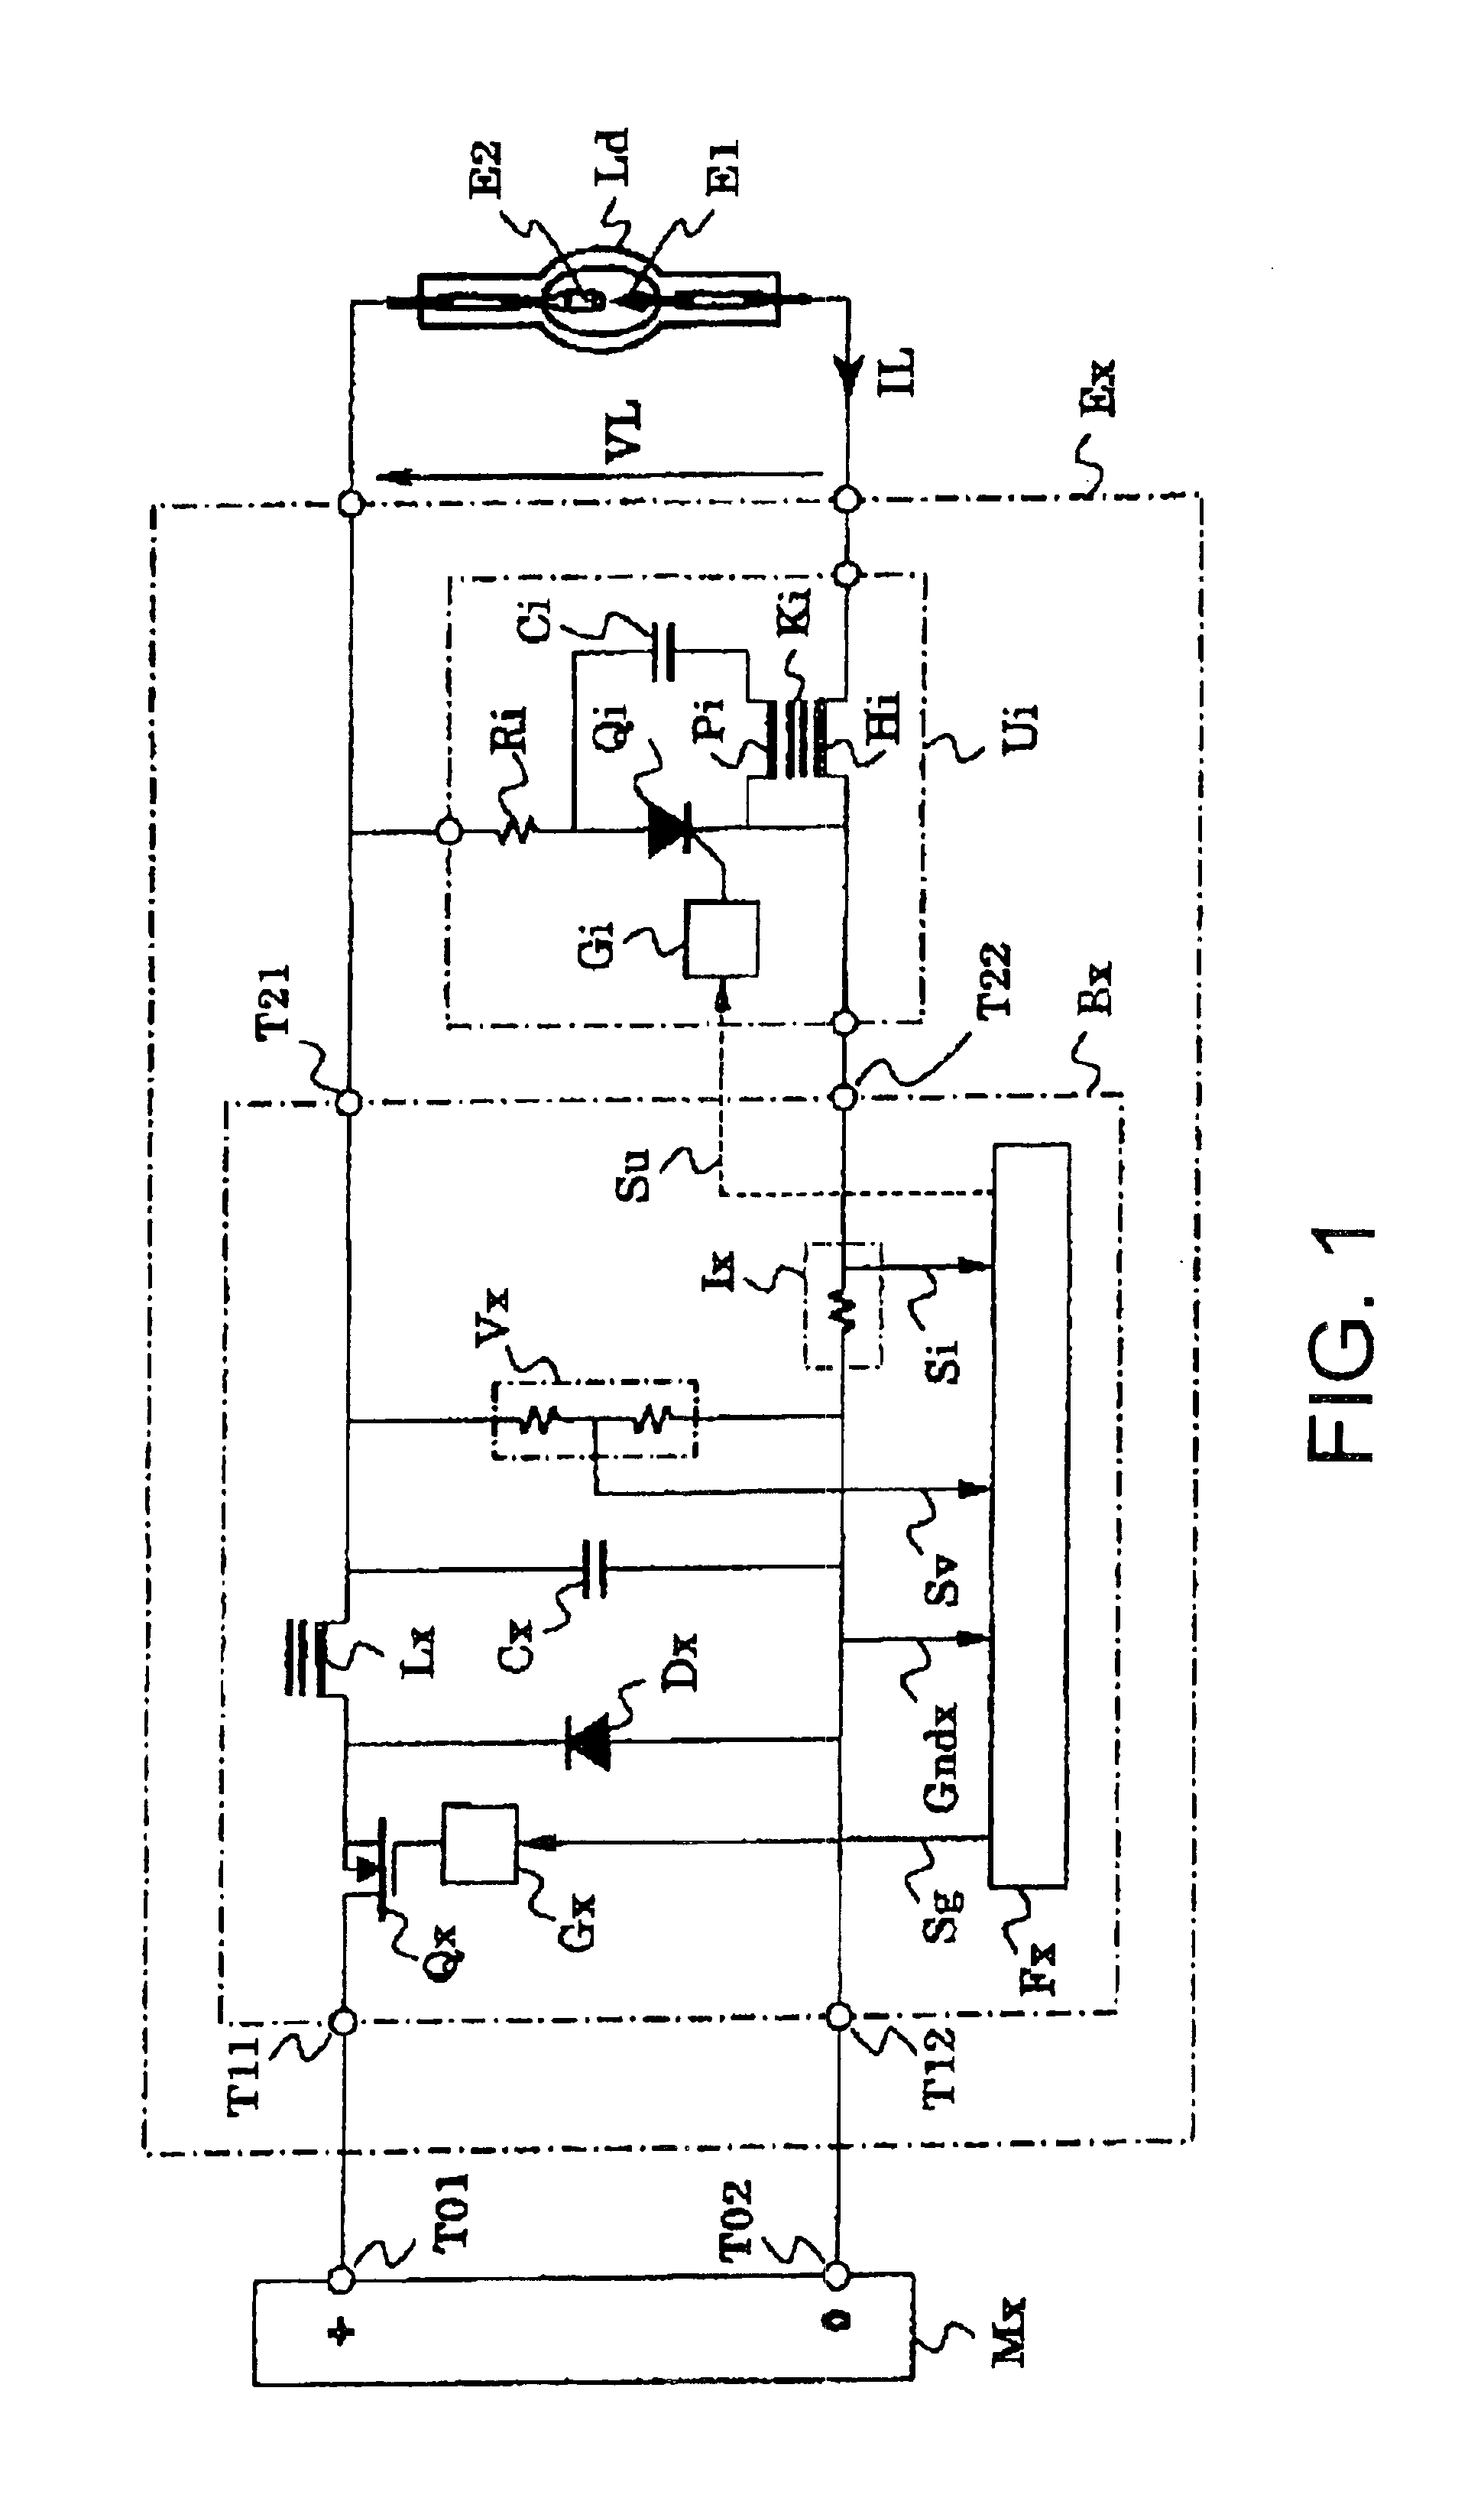 Power feeding apparatus for discharge lamp